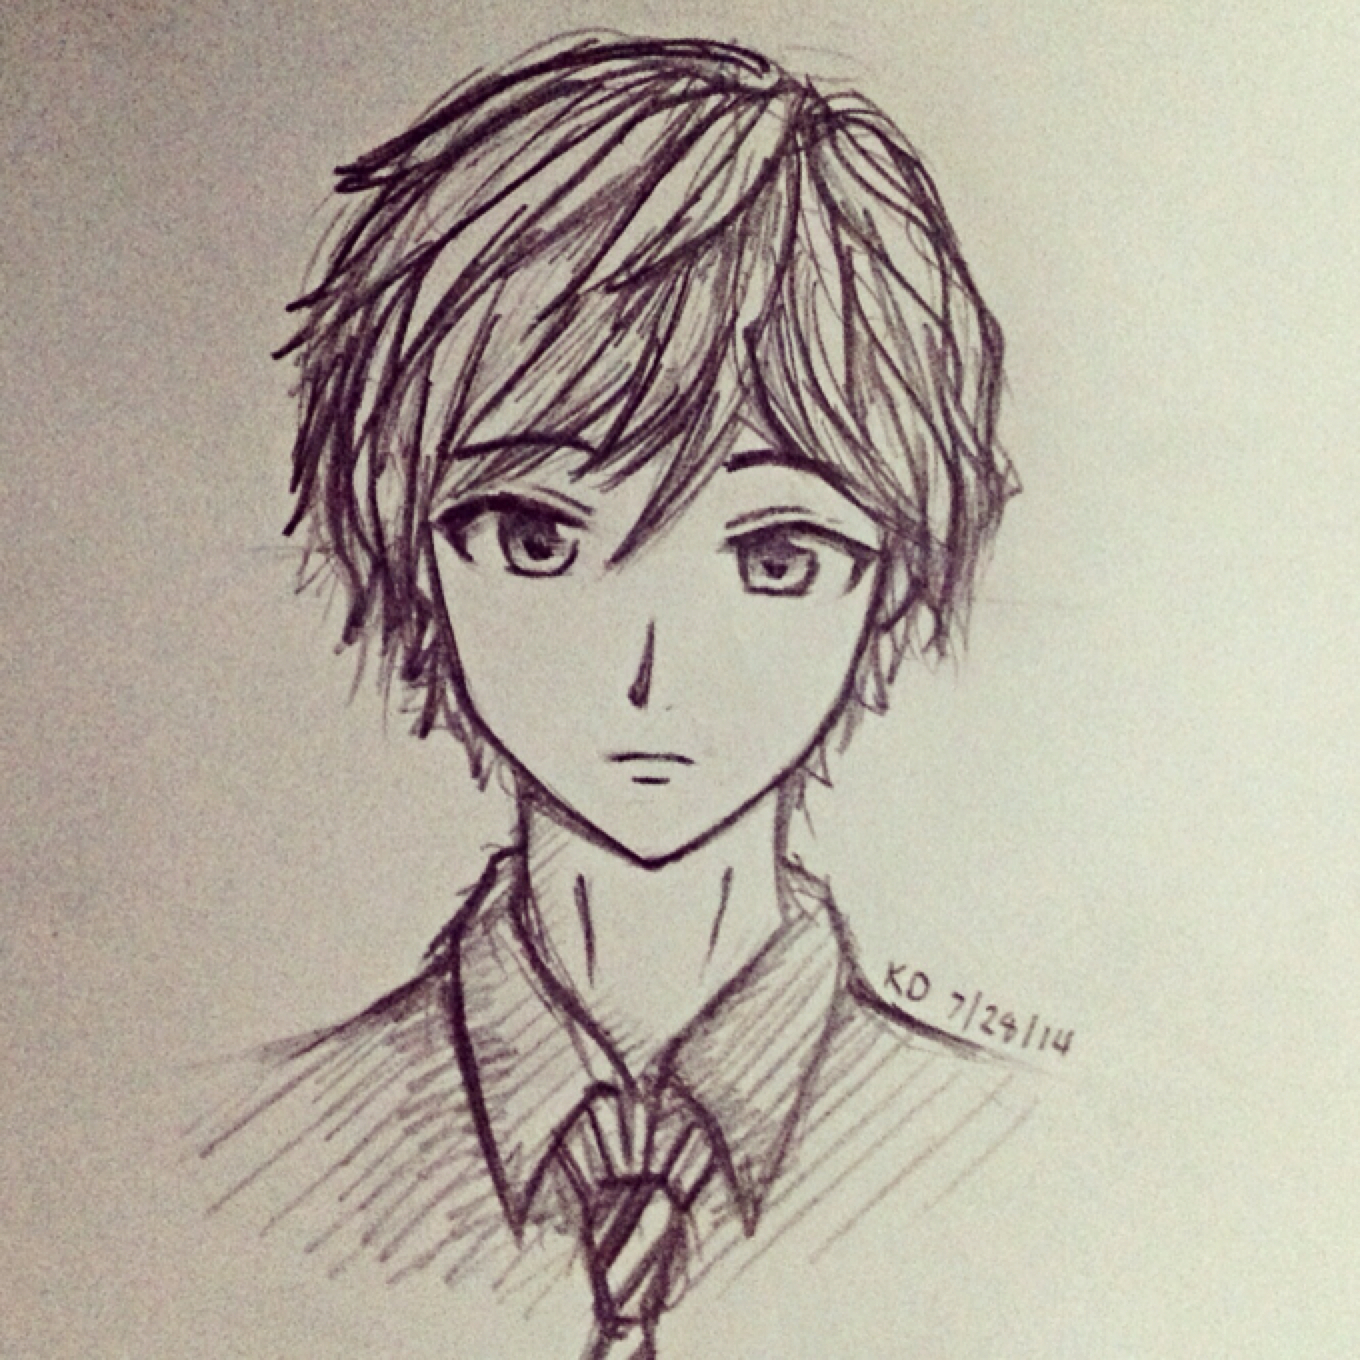 Anime Boy Drawing Images Drawing practice drawing skills drawing